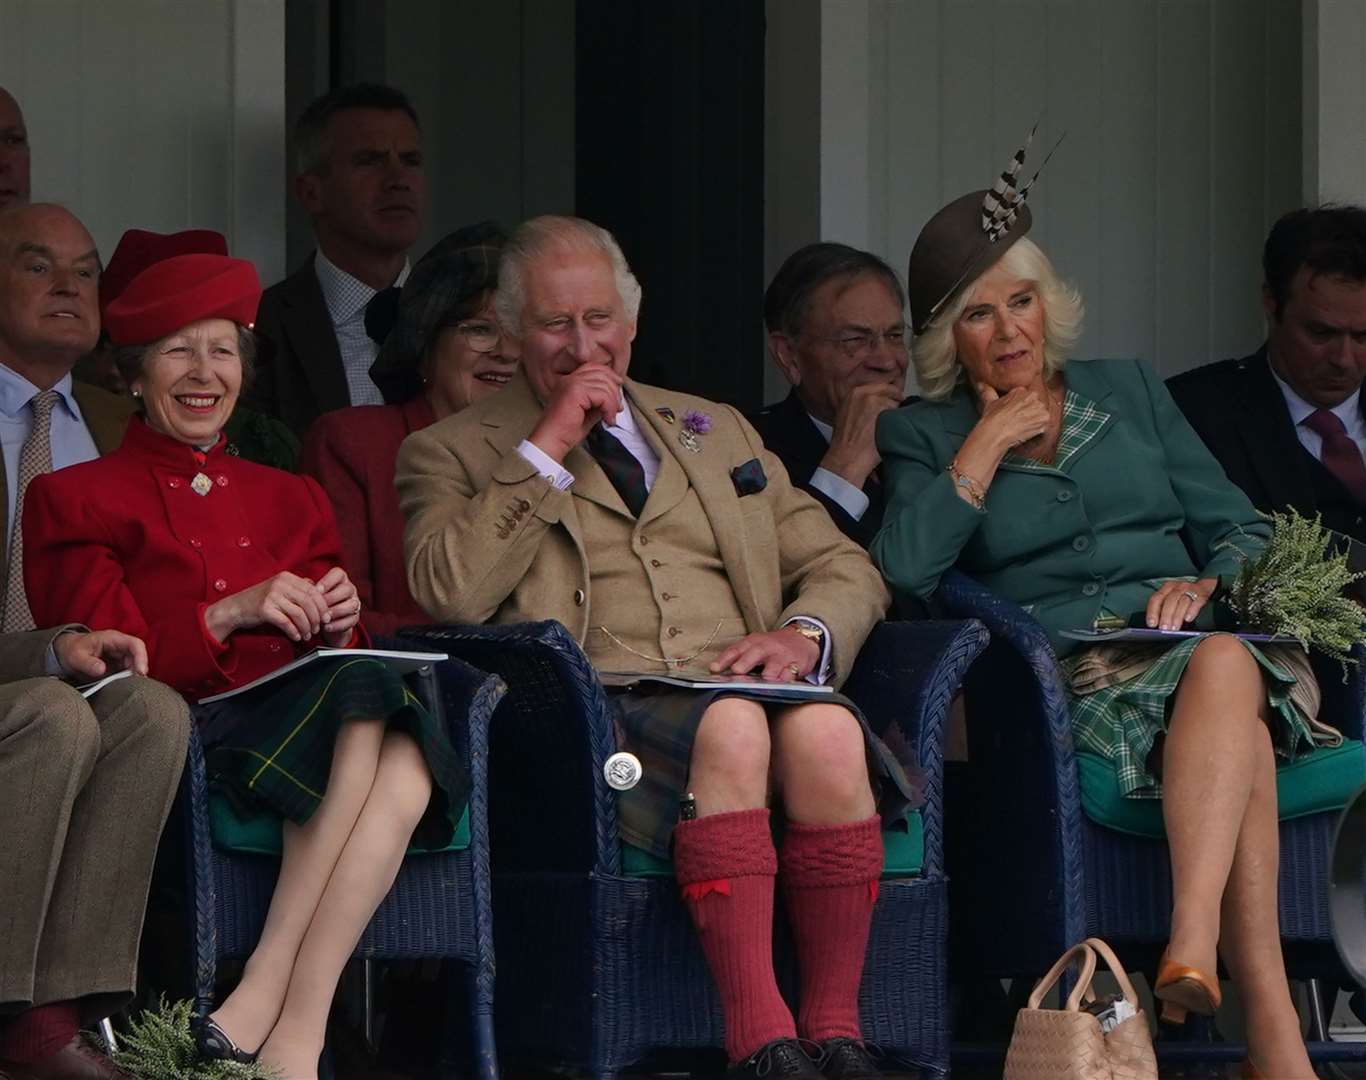 The Princess Royal, the King and the Queen during the Braemar Gathering in September (Andrew Milligan/PA)